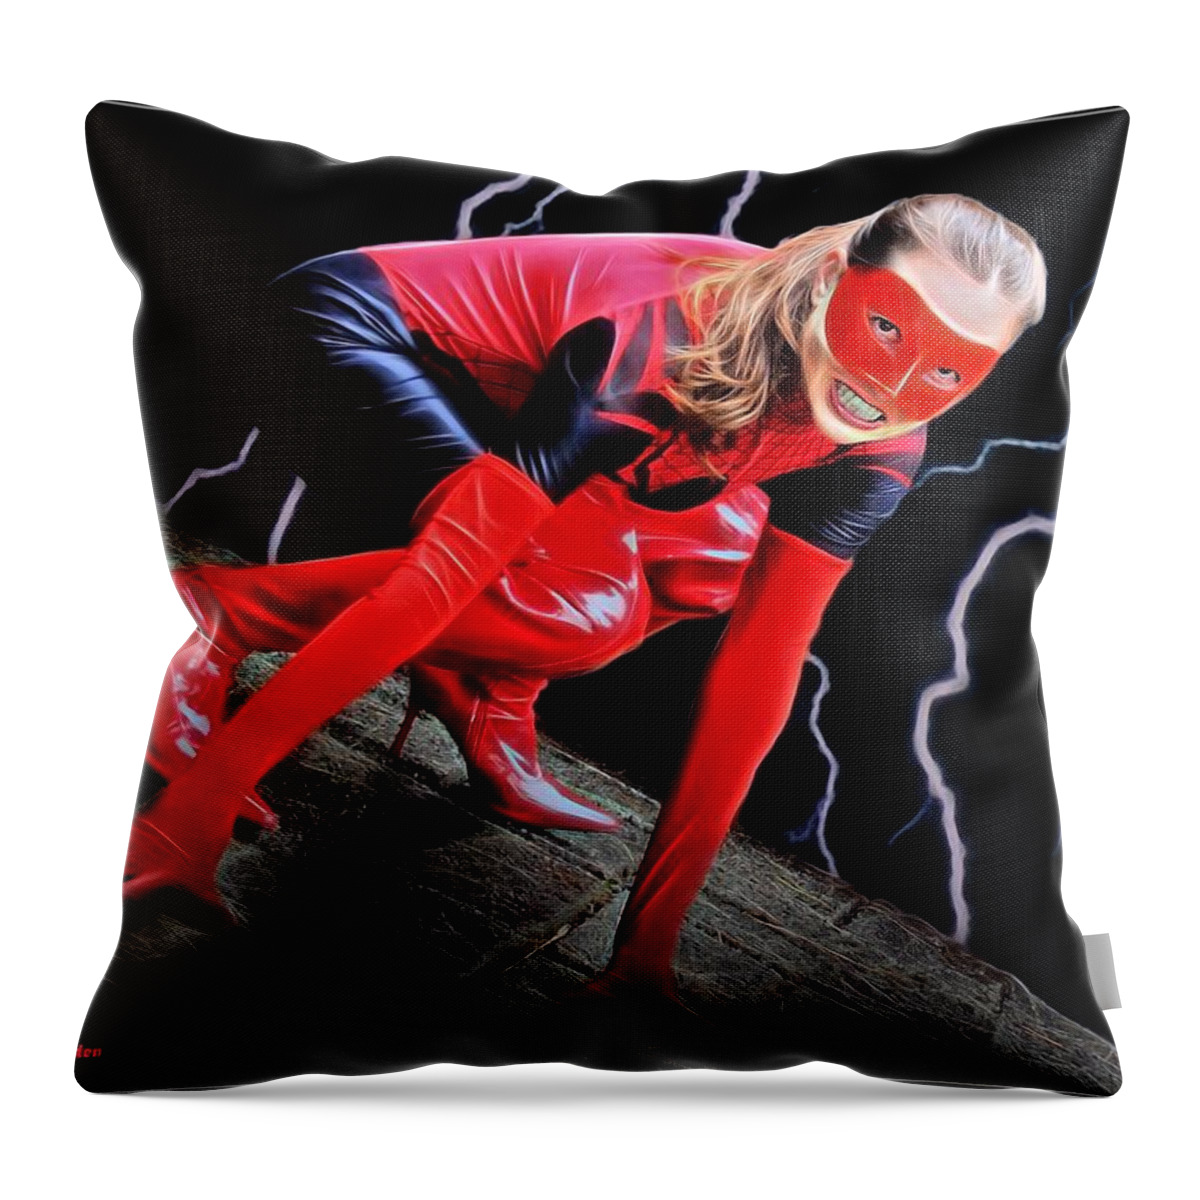 Fantasy Throw Pillow featuring the painting Spider Storm by Jon Volden